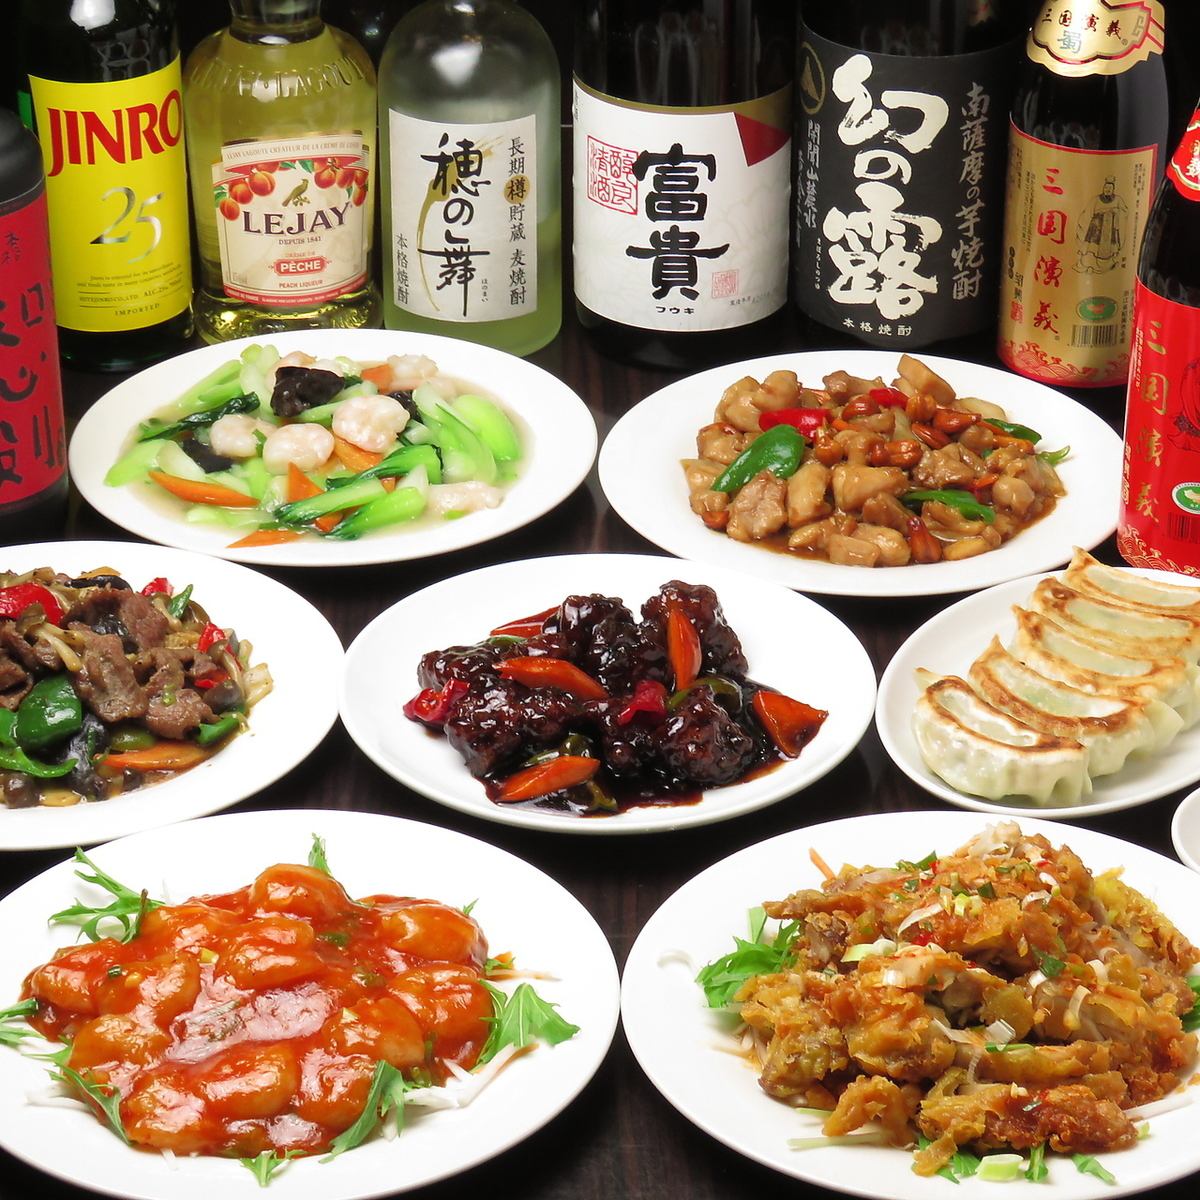 [All-you-can-eat and drink] 3,800 yen with 7 or more dishes and 40 or more alcoholic beverages.Up to 80 people can be accommodated in private rooms and tatami rooms♪